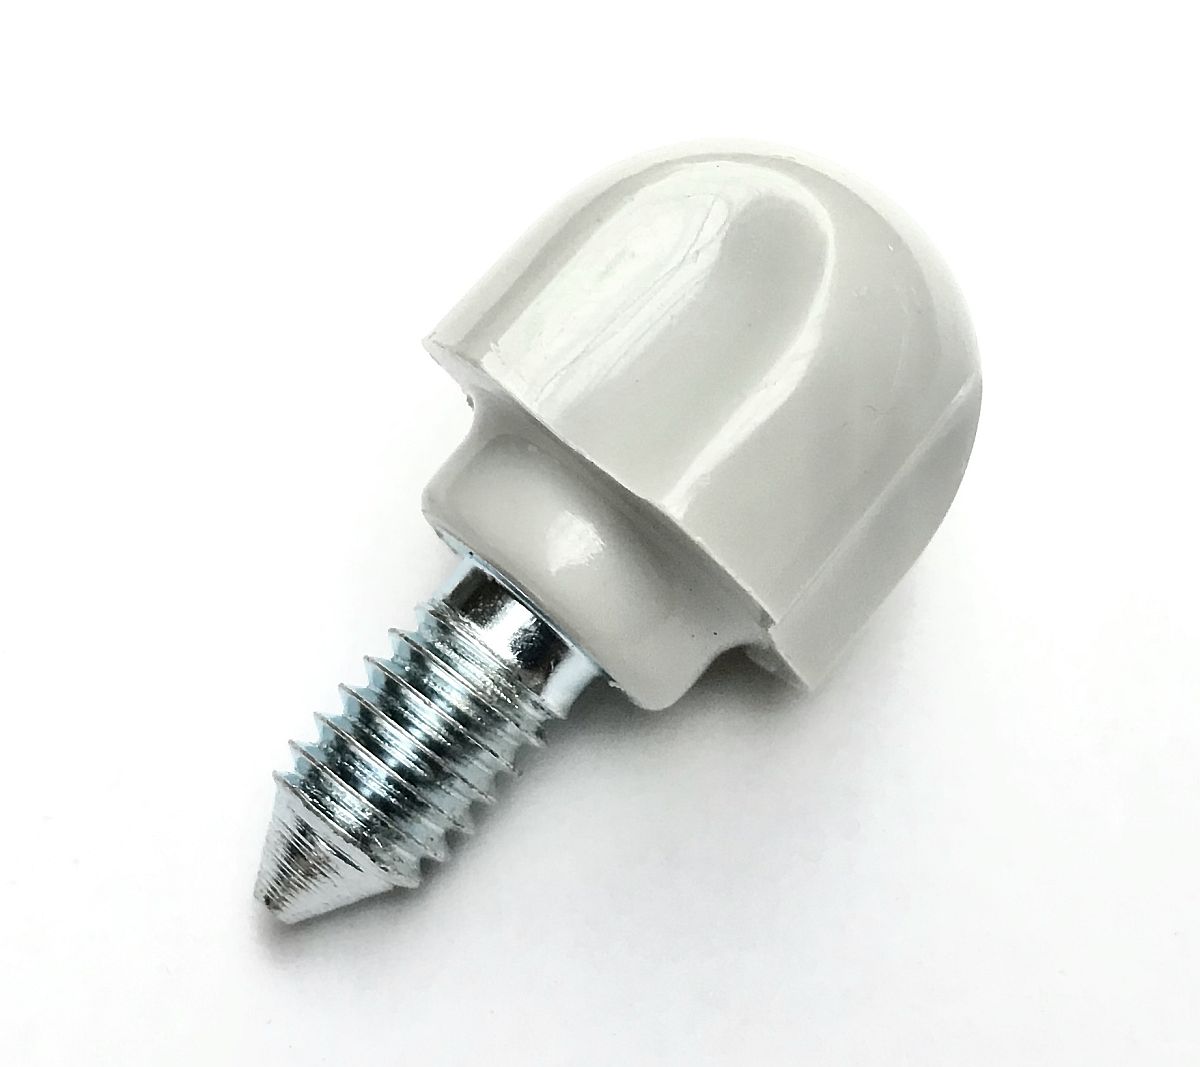 Mixer Knob for Kitchenaid Replacement Parts,As Kitchenaid Mixer Replacement,Mixer  Screw Attachment for Kitchenaid Stand Mixer 2